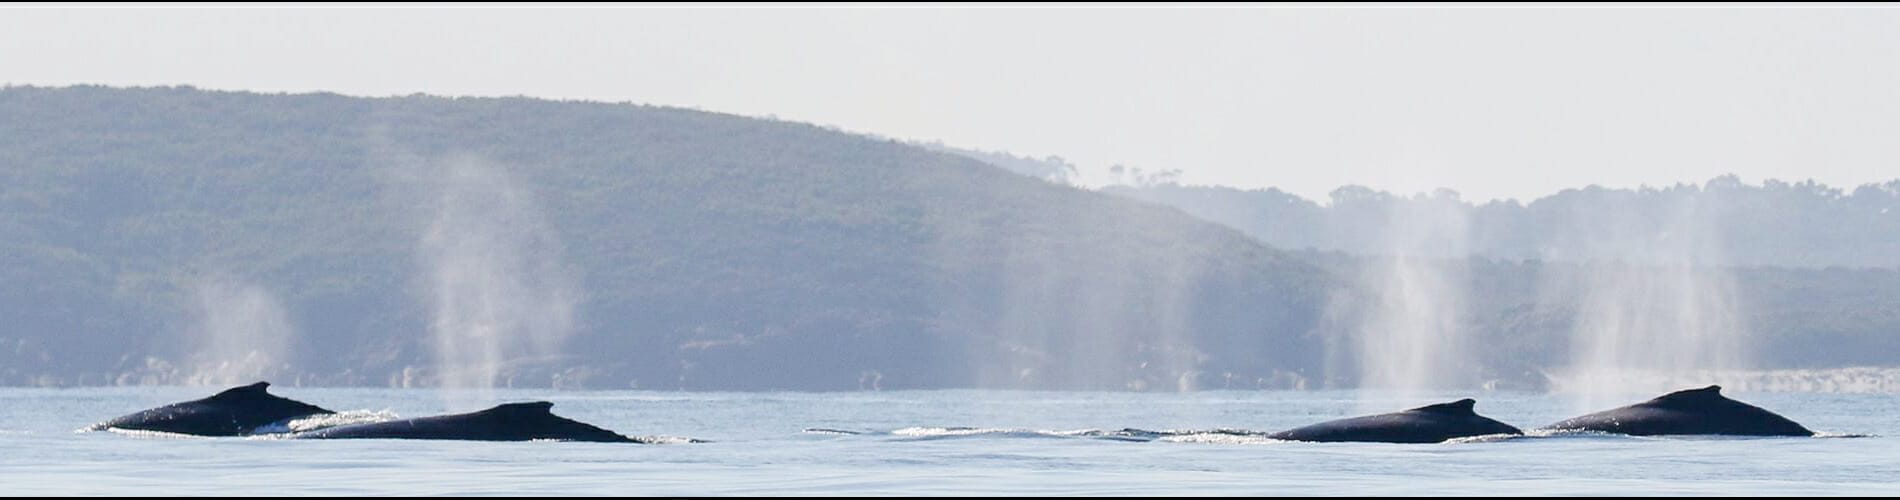 Humpback whales in King George Sound. Photo Credit: Kirsty Alexander